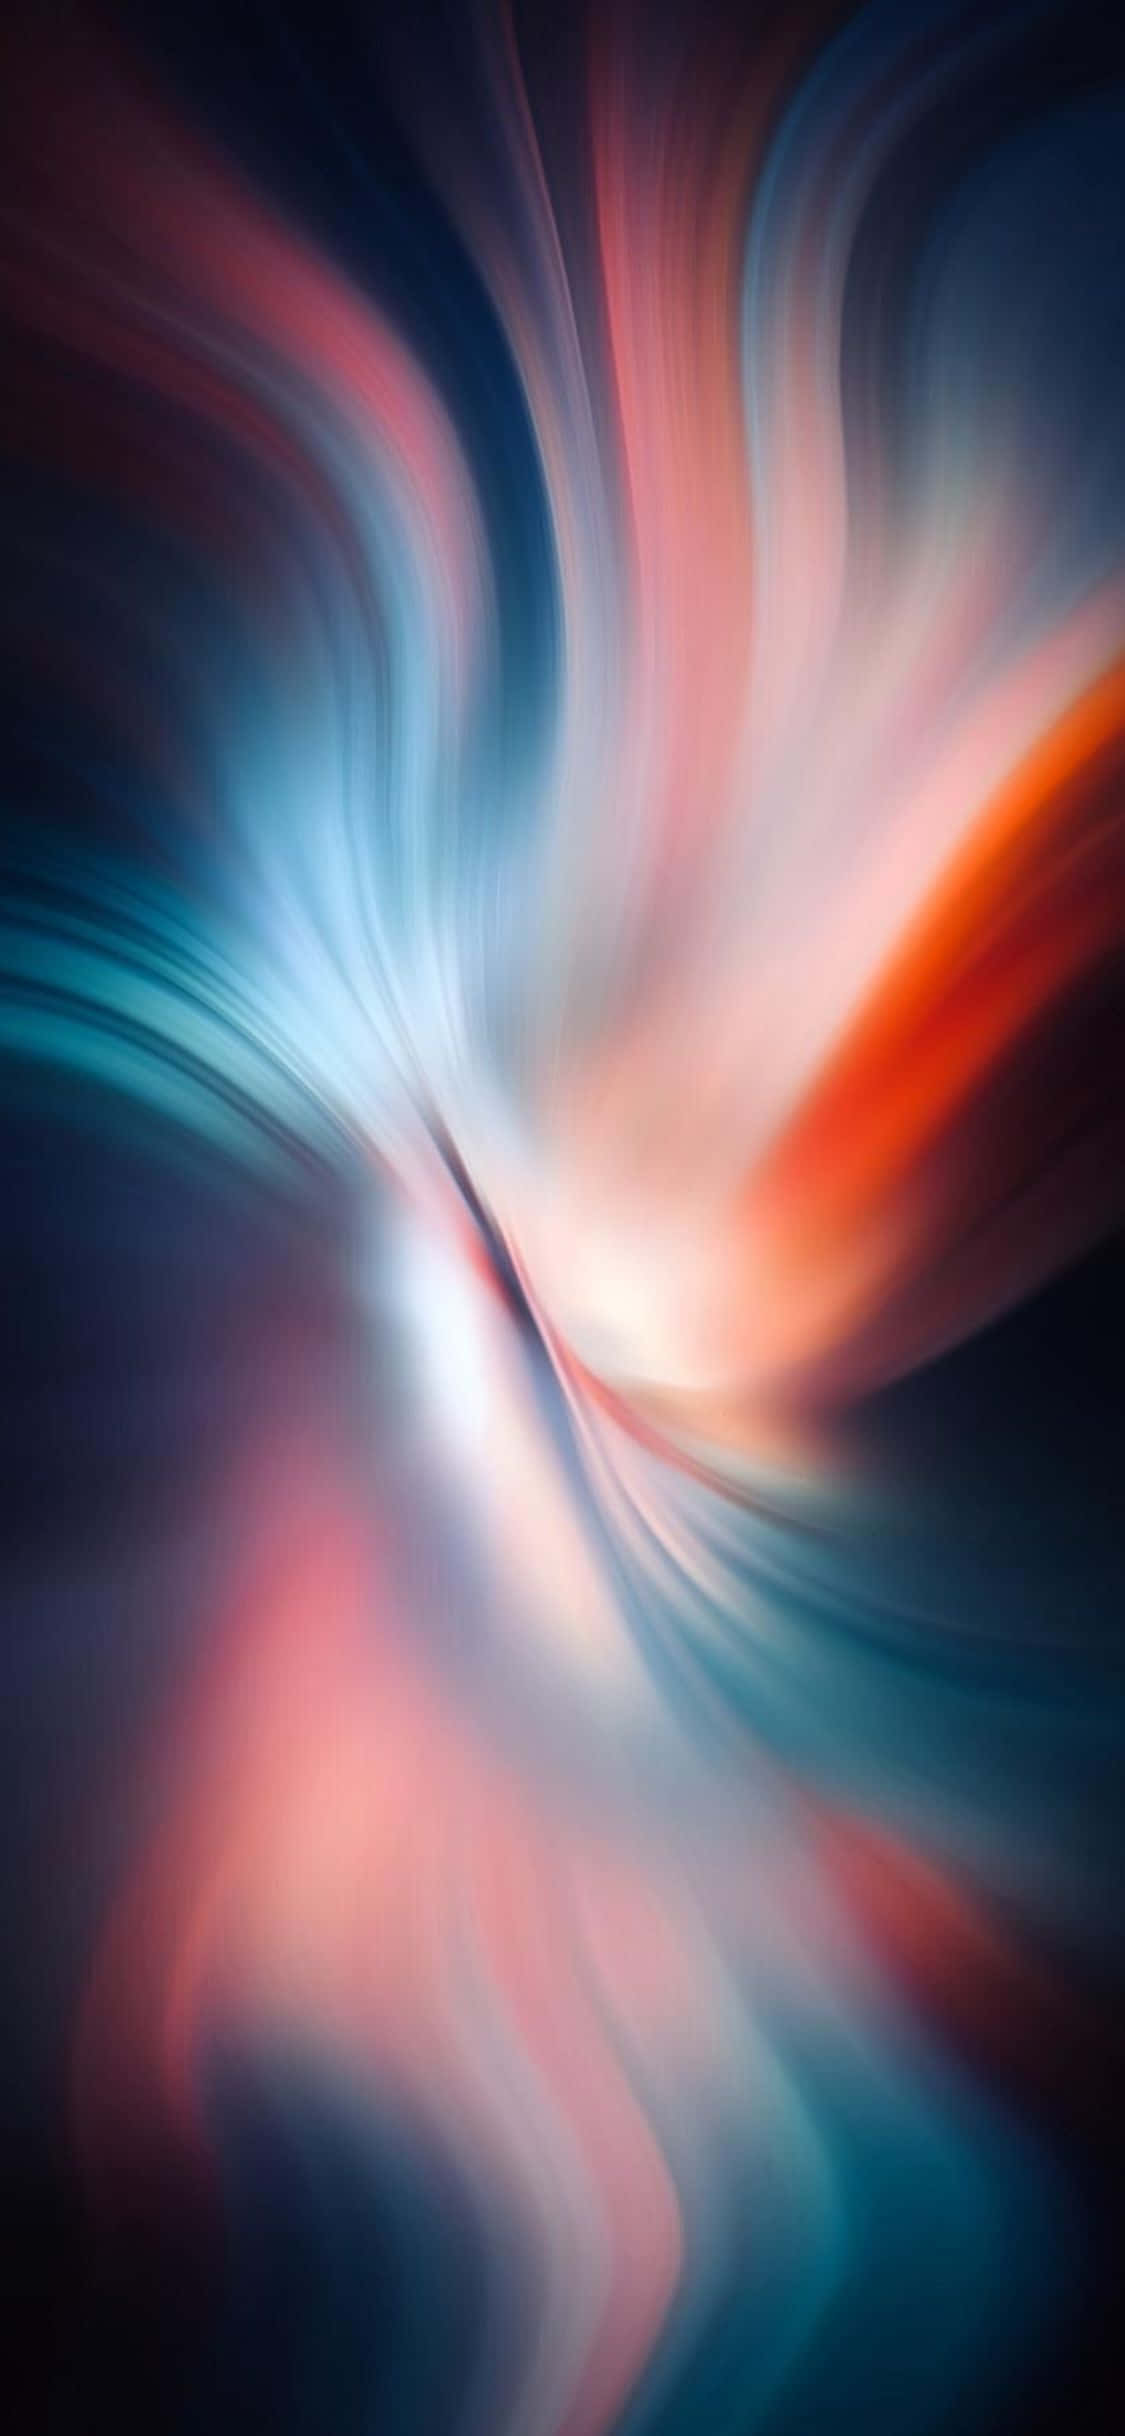 Download An Abstract Image Of A Colorful Swirling Background ...